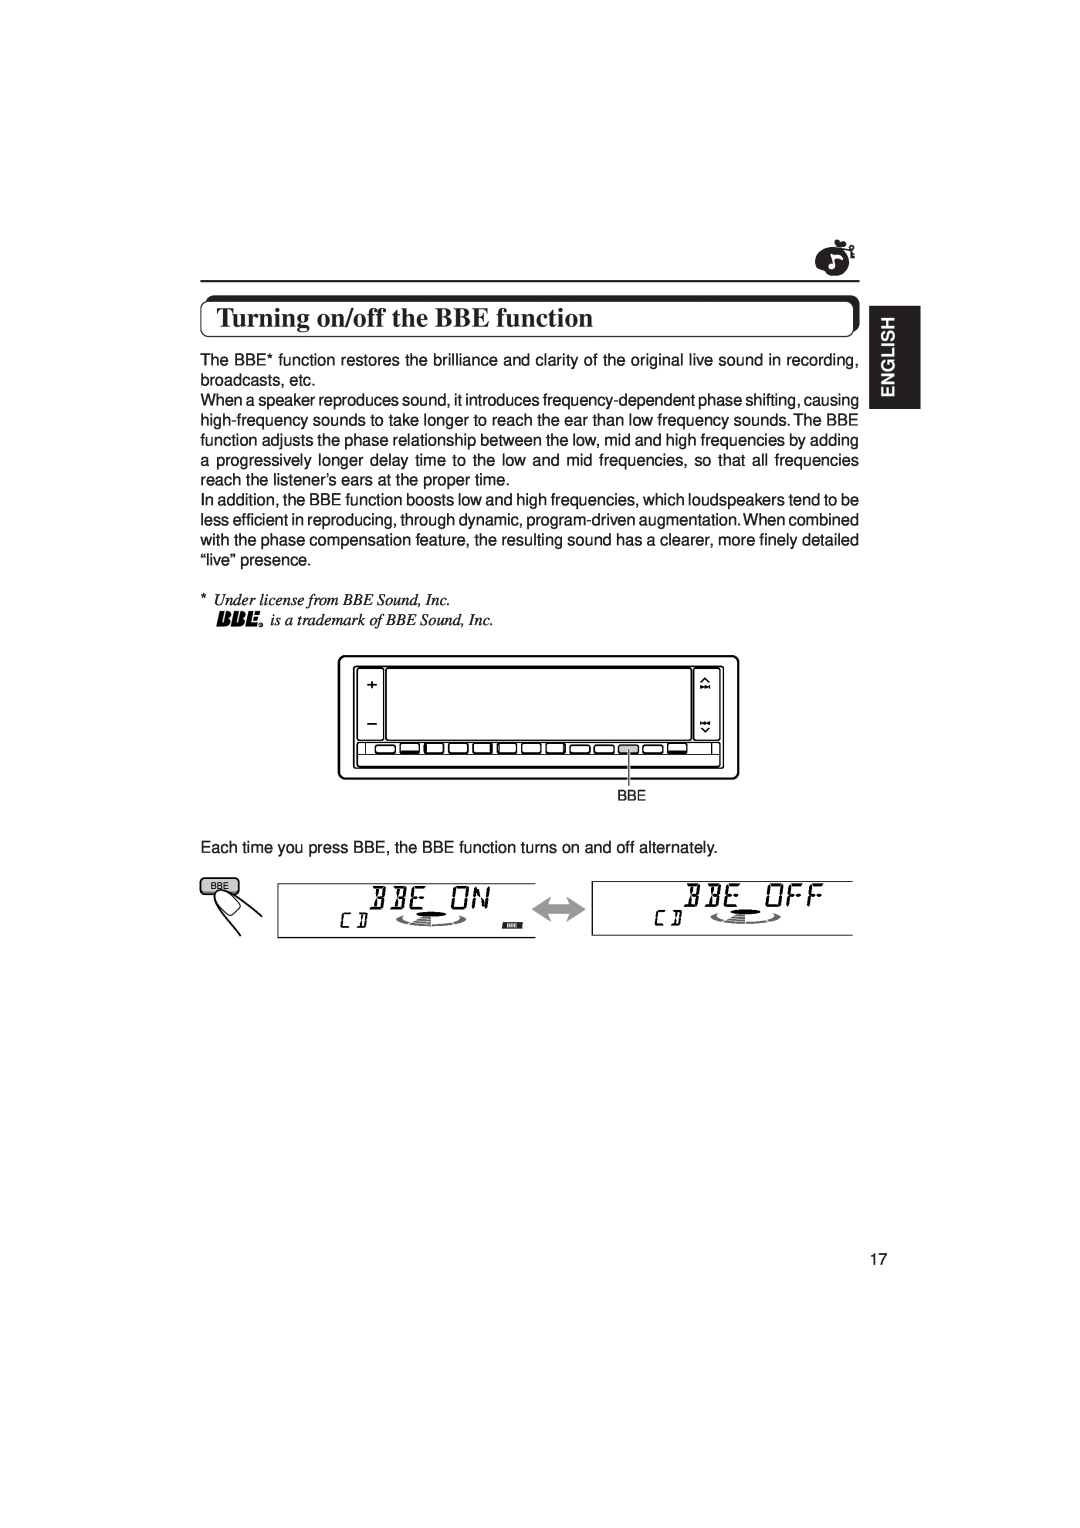 JVC KD-LX1 Turning on/off the BBE function, English, Under license from BBE Sound, Inc is a trademark of BBE Sound, Inc 